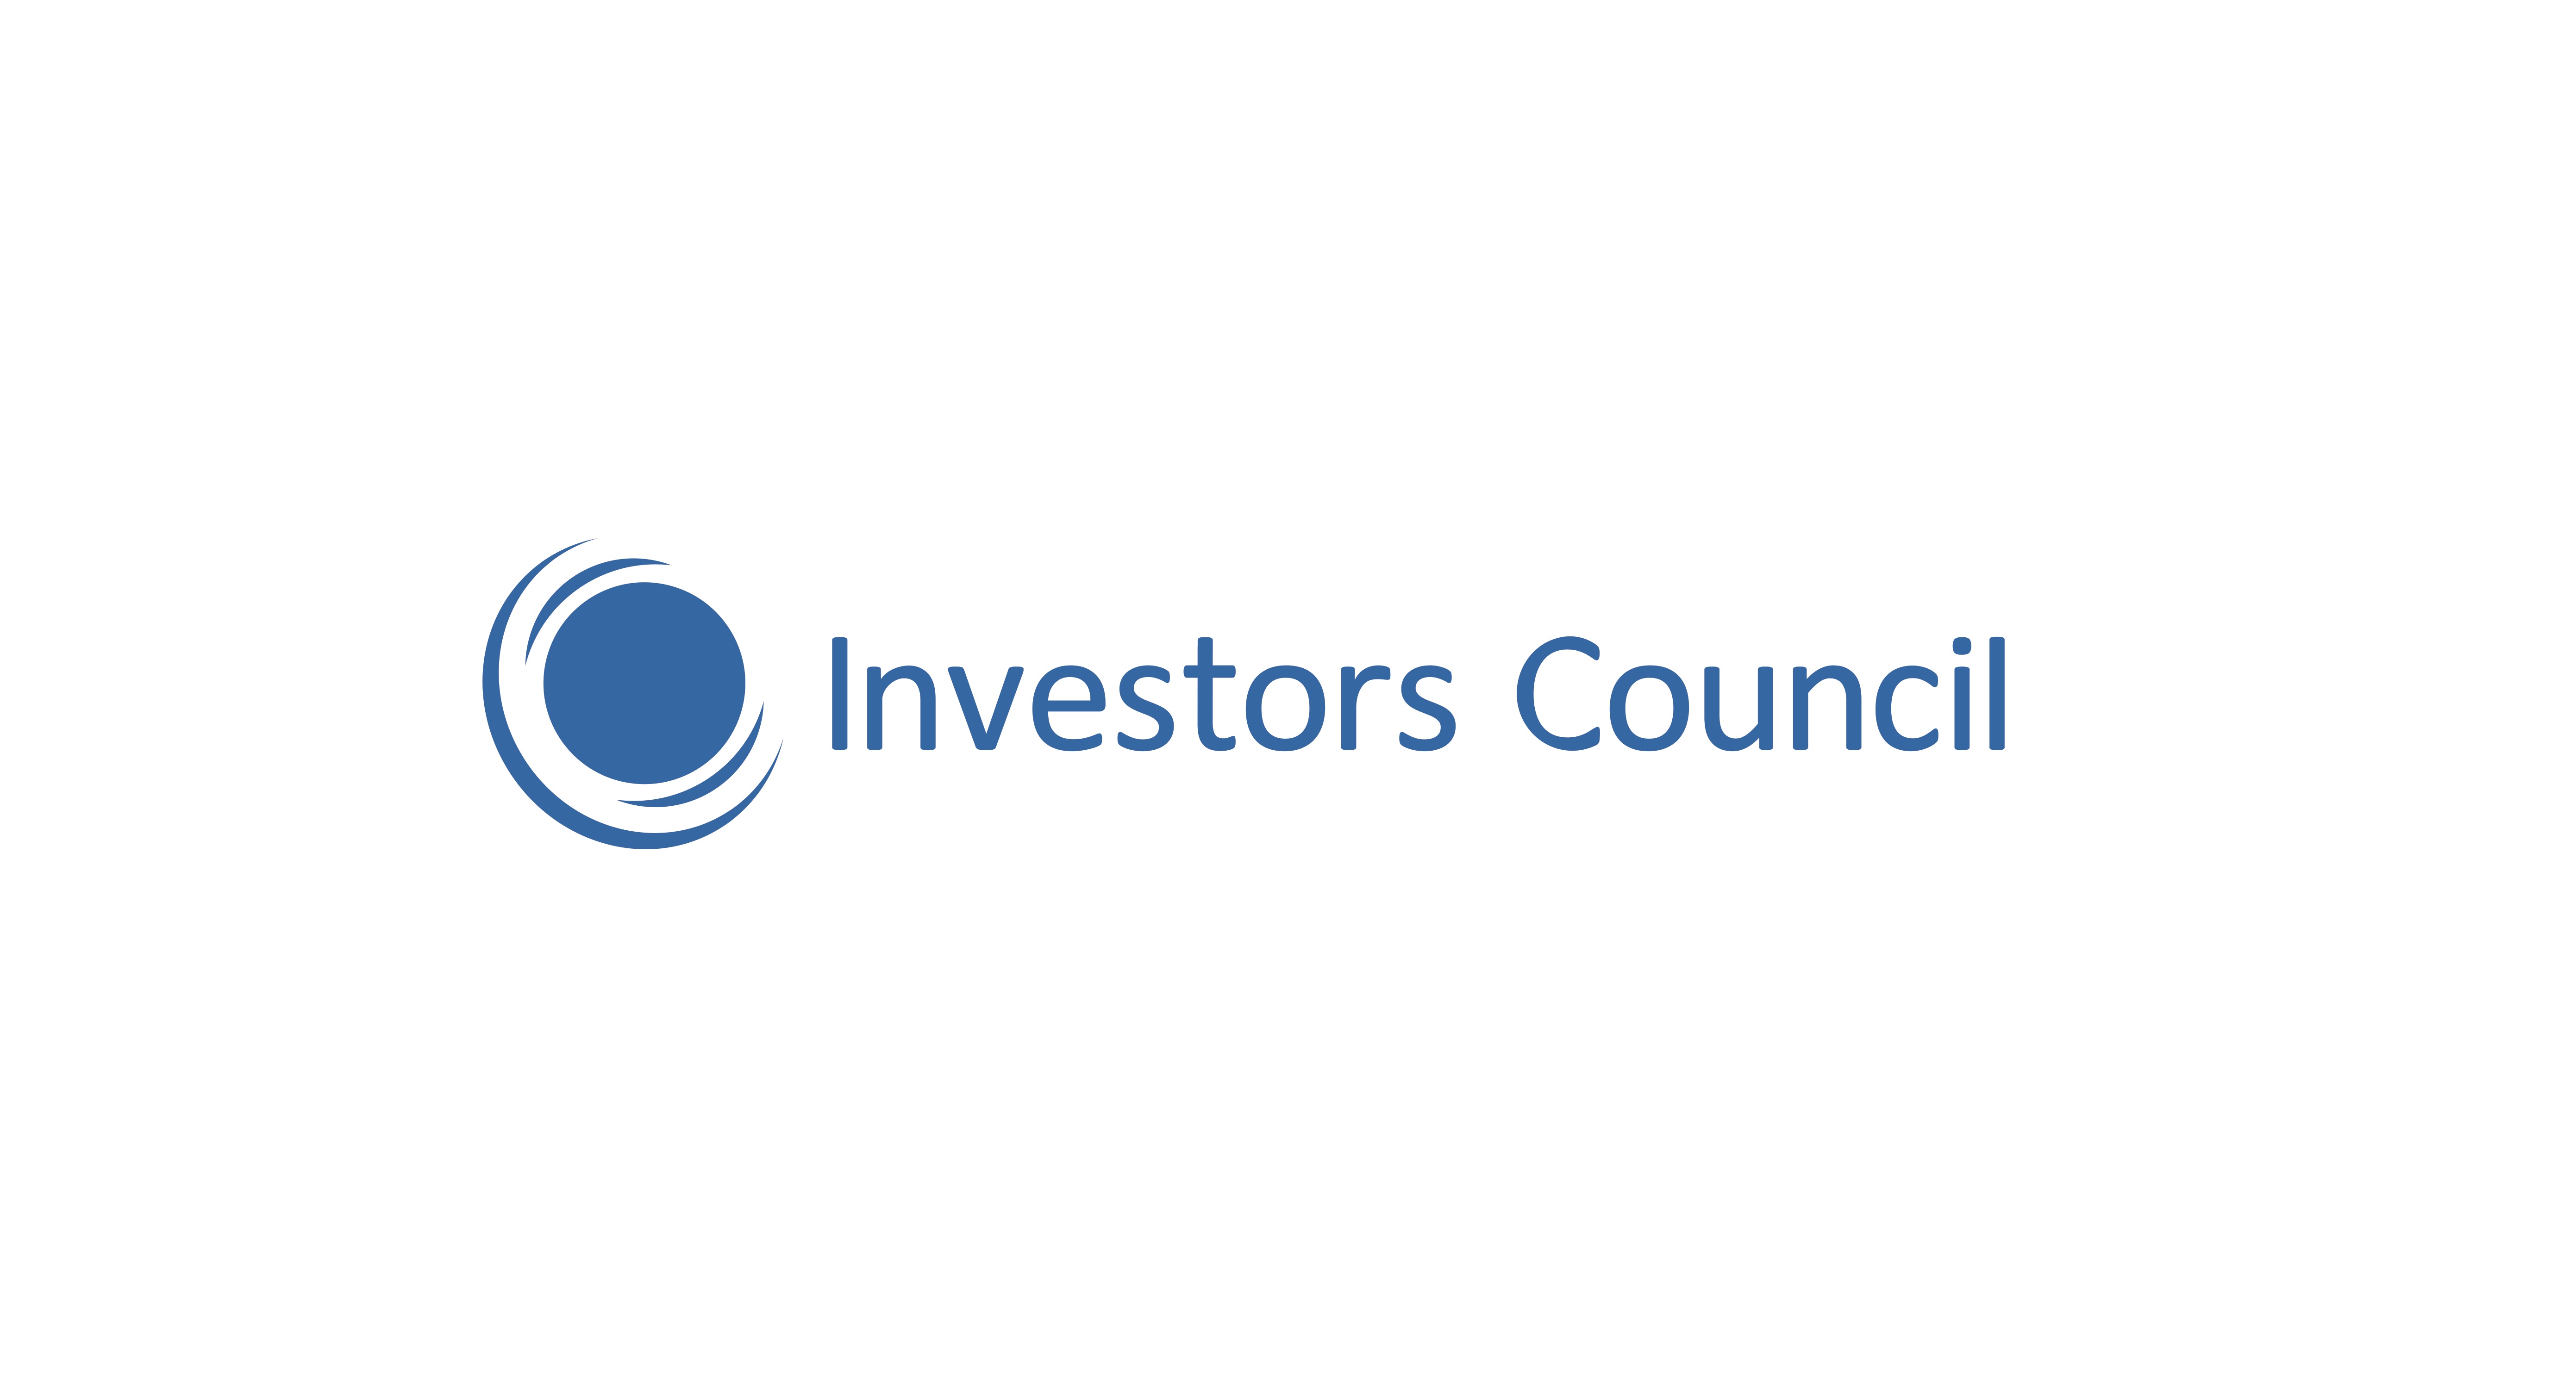 The joint open letter from the Business Associations, members of the Georgian Investors Council, addressed to the President of the European Commission, Dr. Ursula von der Leyen.